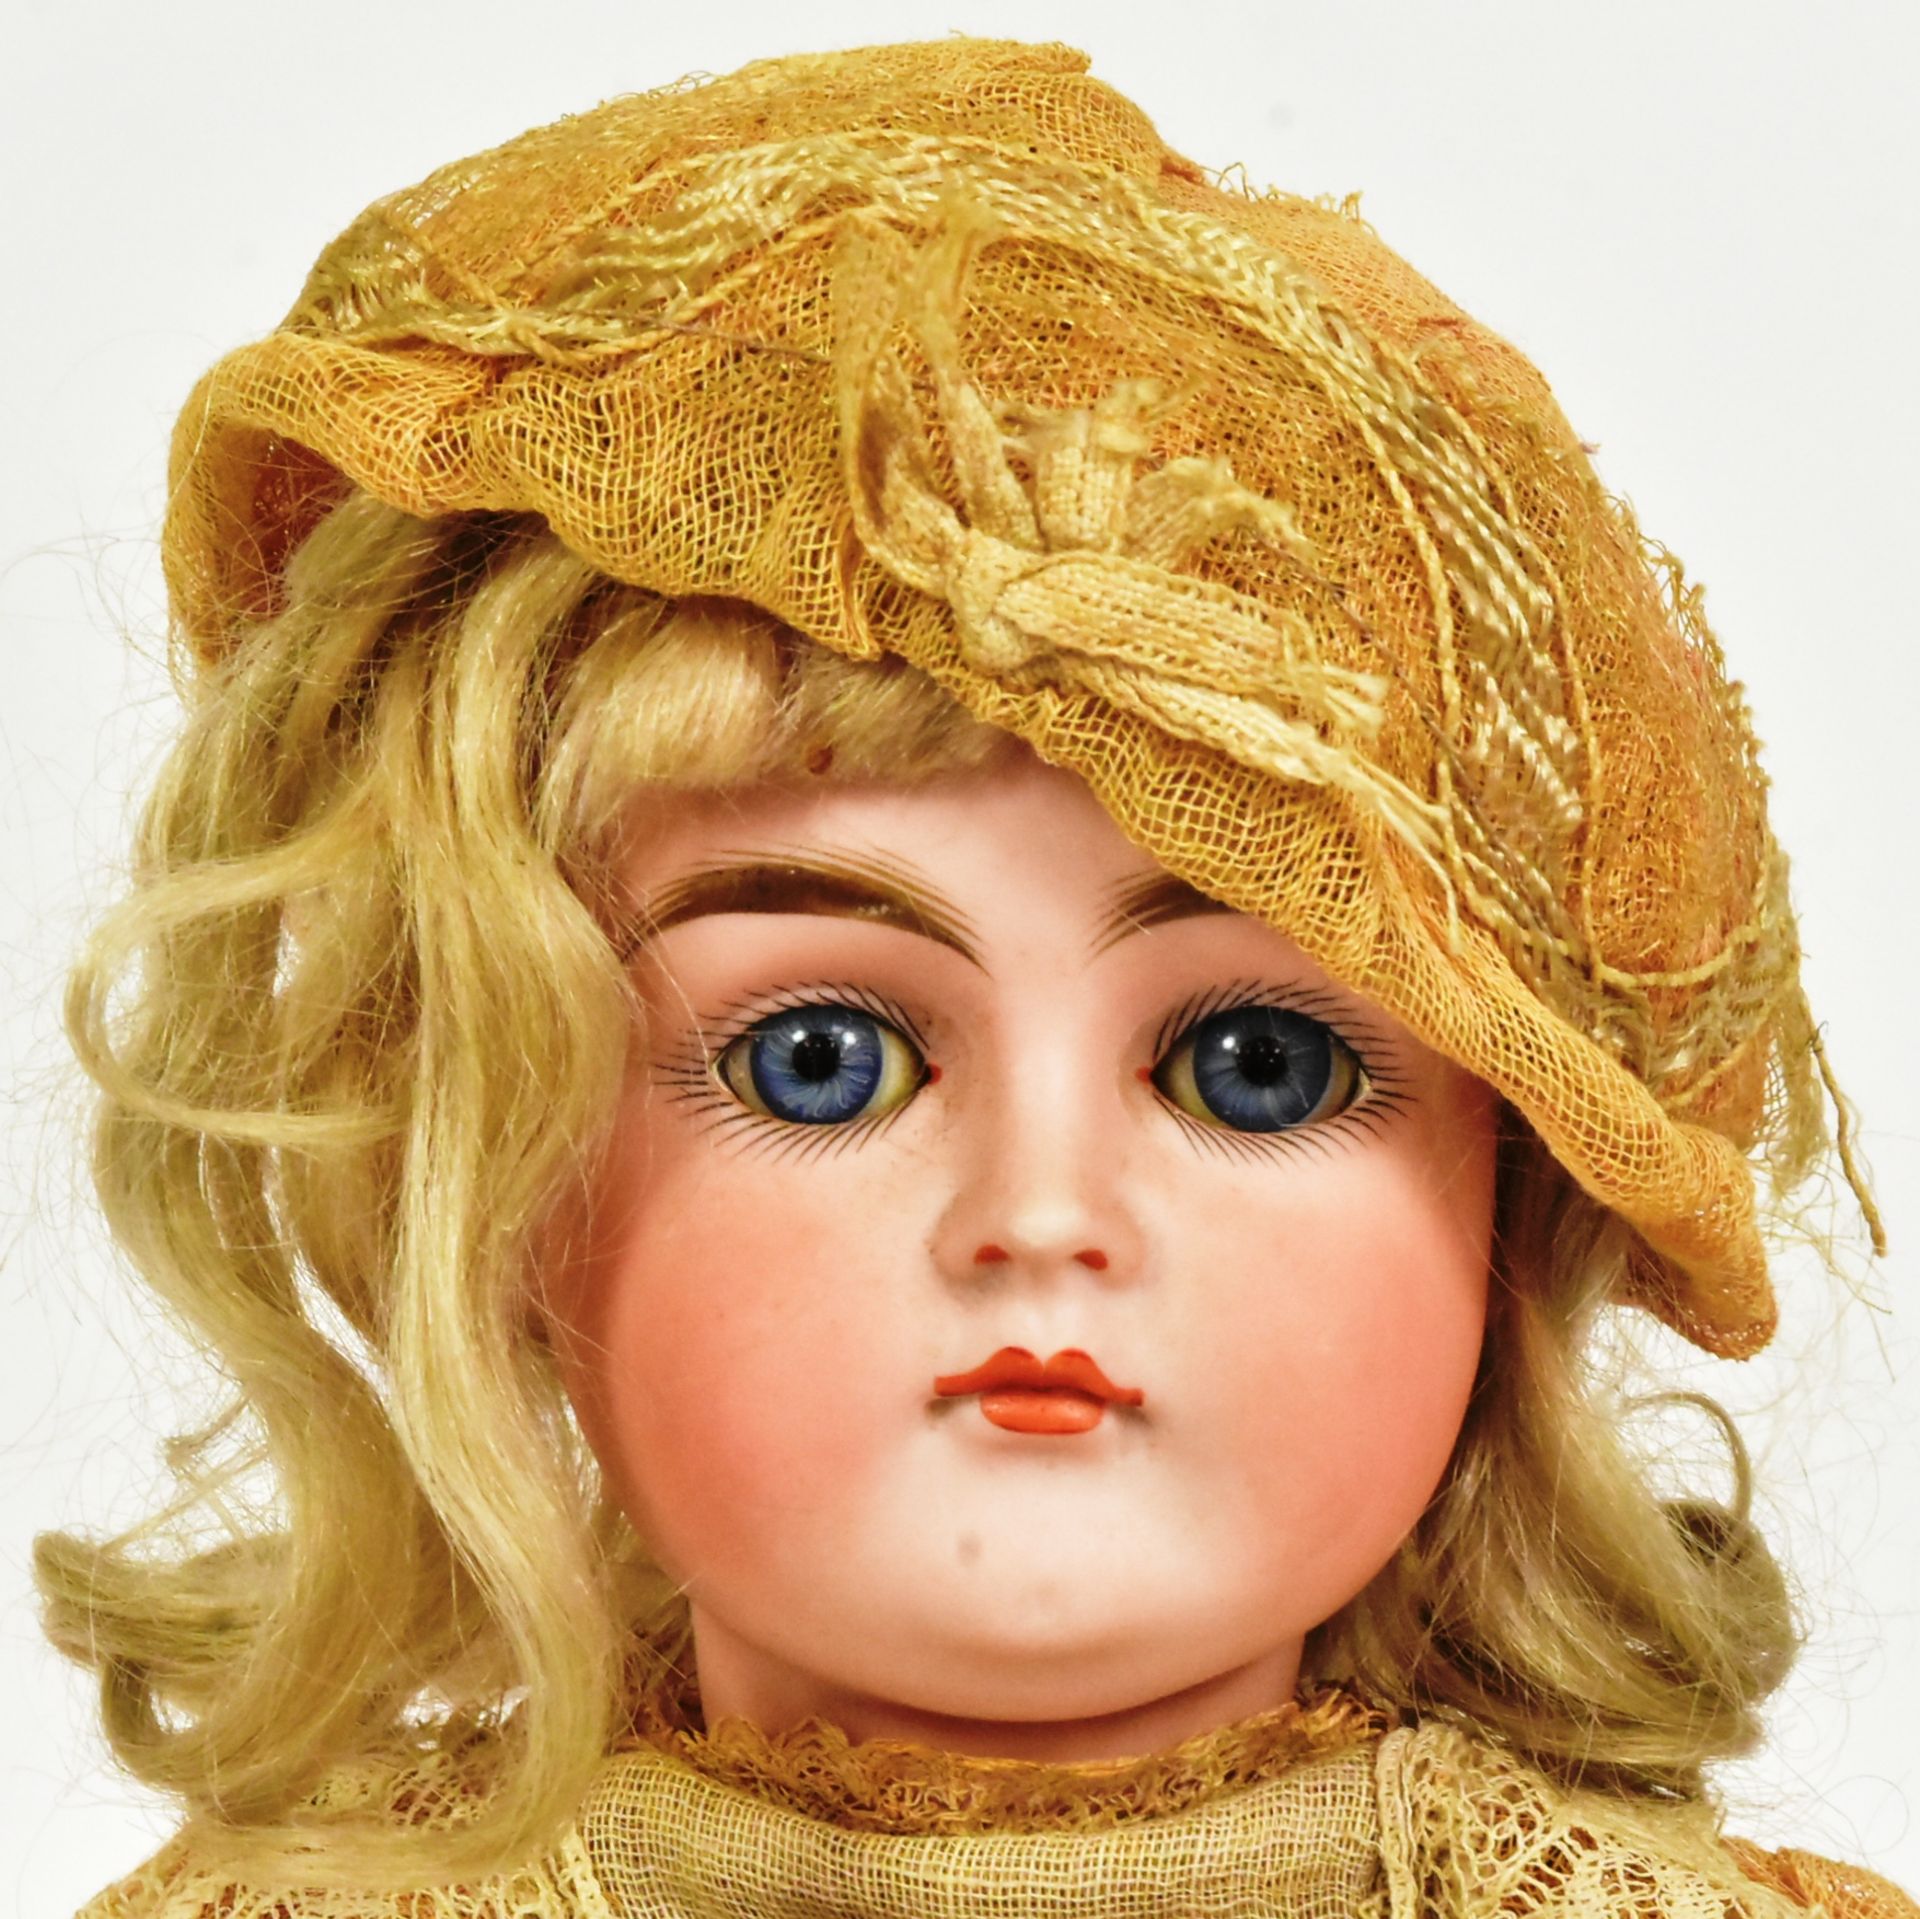 KESTNER - ANTIQUE EARLY 20TH CENTURY BISQUE HEADED DOLL - Image 2 of 6